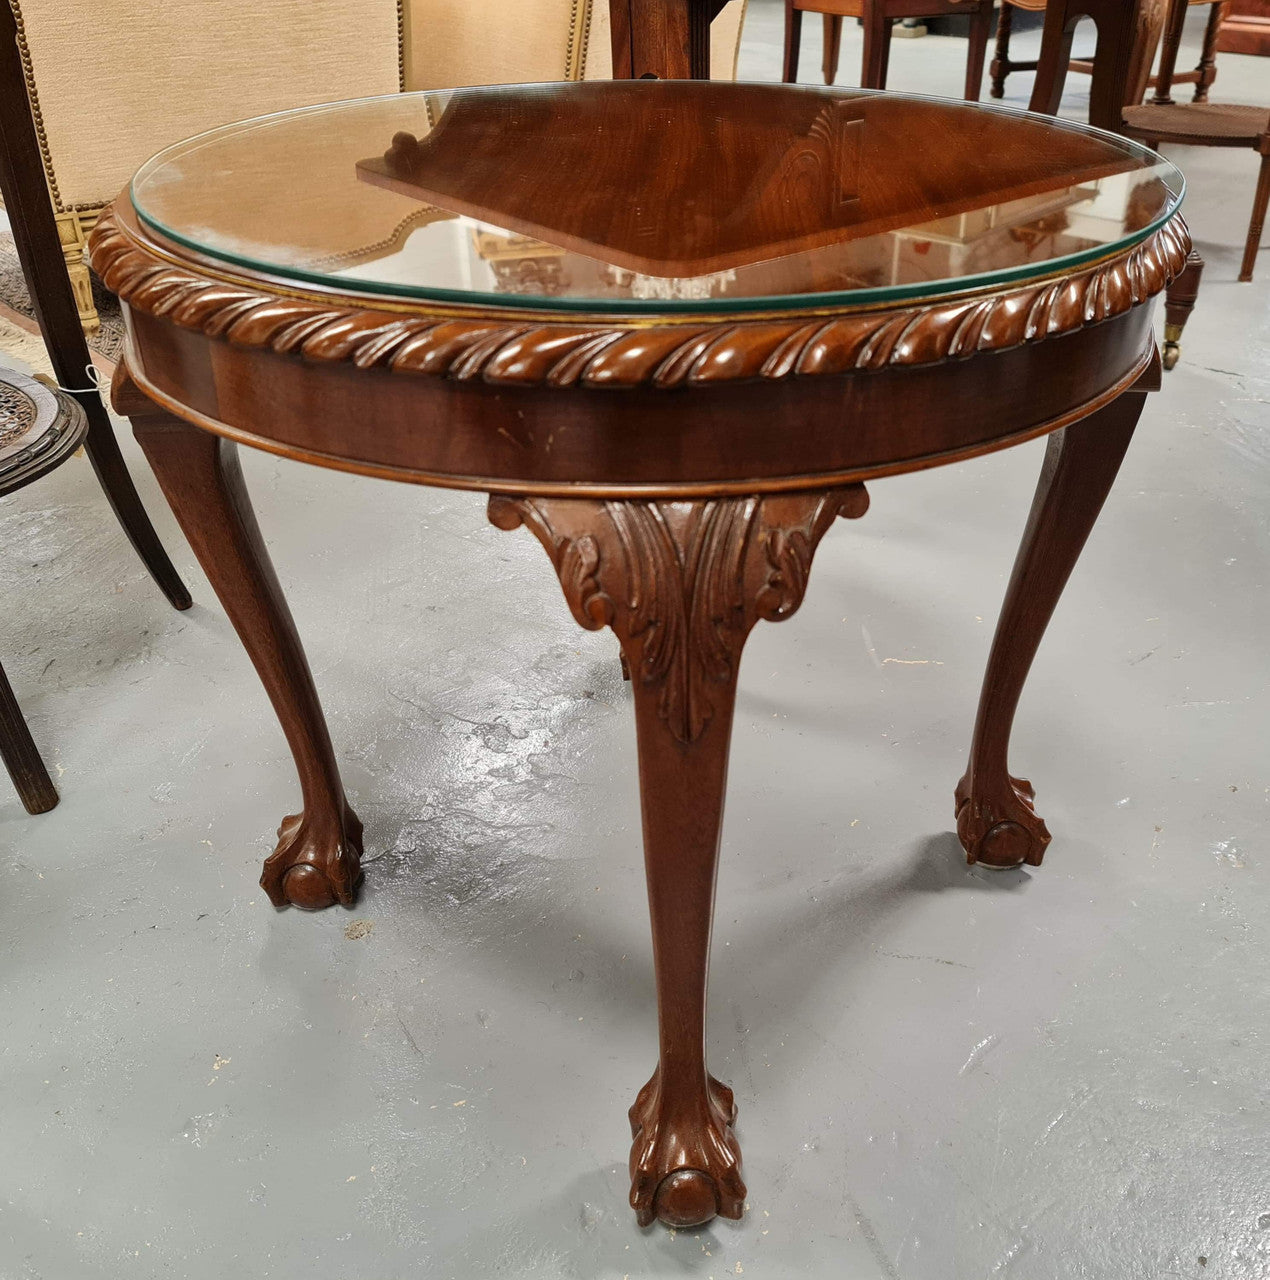 A beautiful round Mahogany Chippendale style coffee table with a glass top. In good original detailed condition.